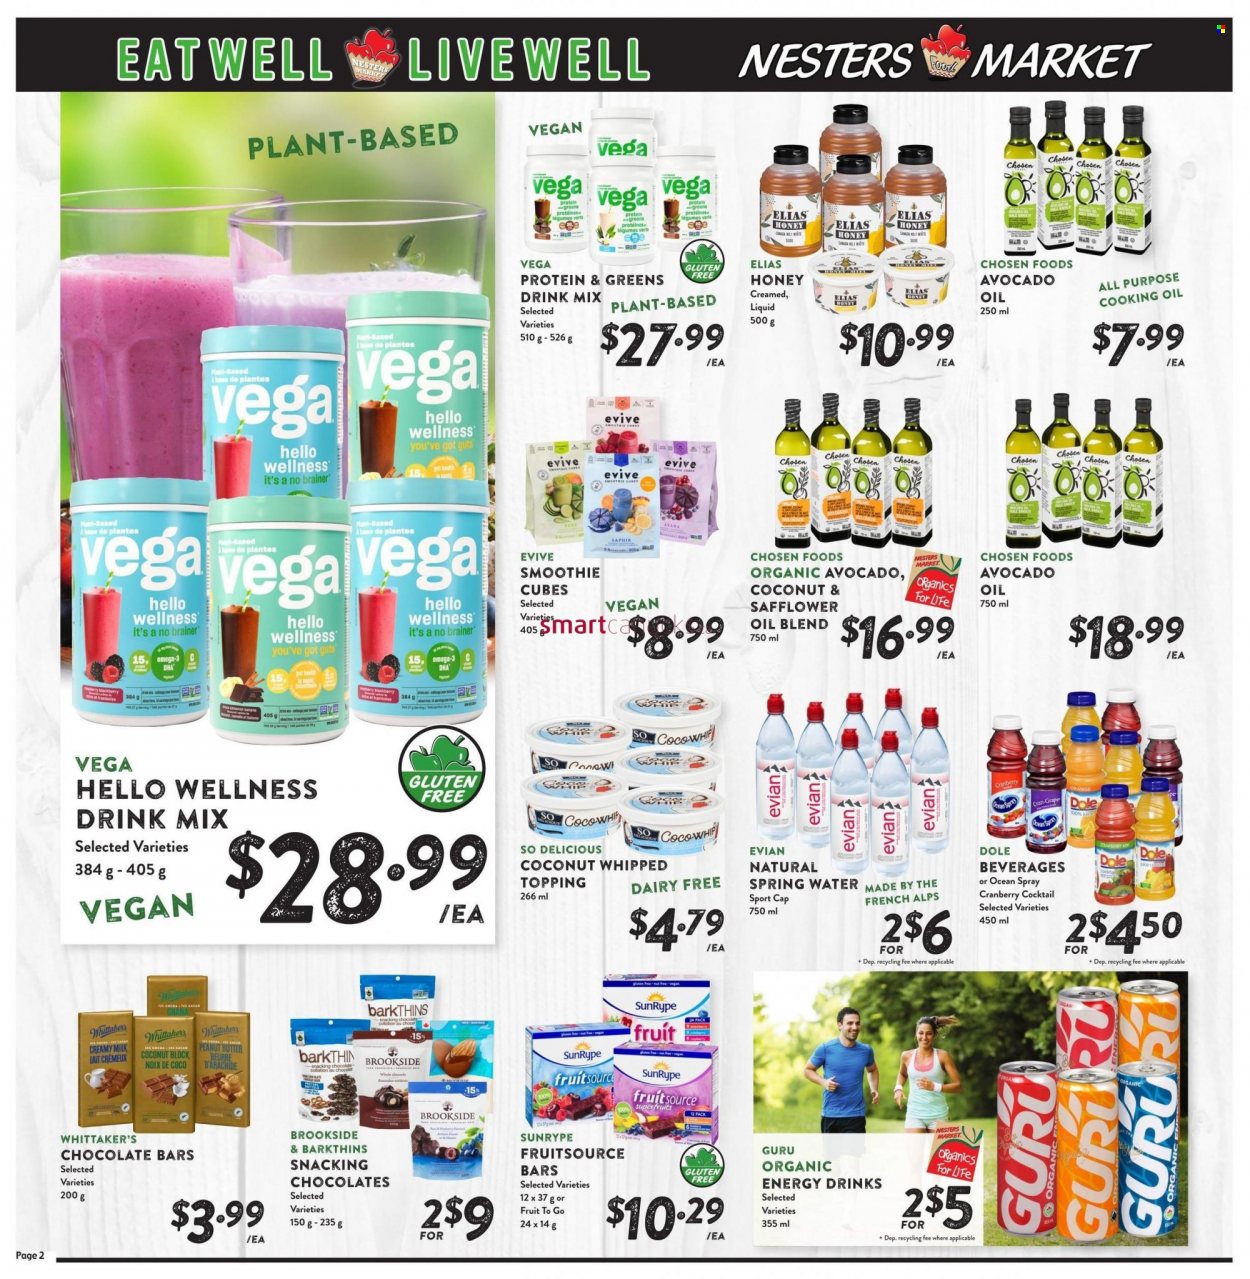 thumbnail - Nesters Food Market Flyer - March 01, 2023 - March 31, 2023 - Sales products - Dole, Whittaker's, chocolate bar, topping, avocado oil, safflower oil, cooking oil, honey, peanut butter, energy drink, Cran-Grape, smoothie, spring water, Evian, water, Omega-3. Page 2.